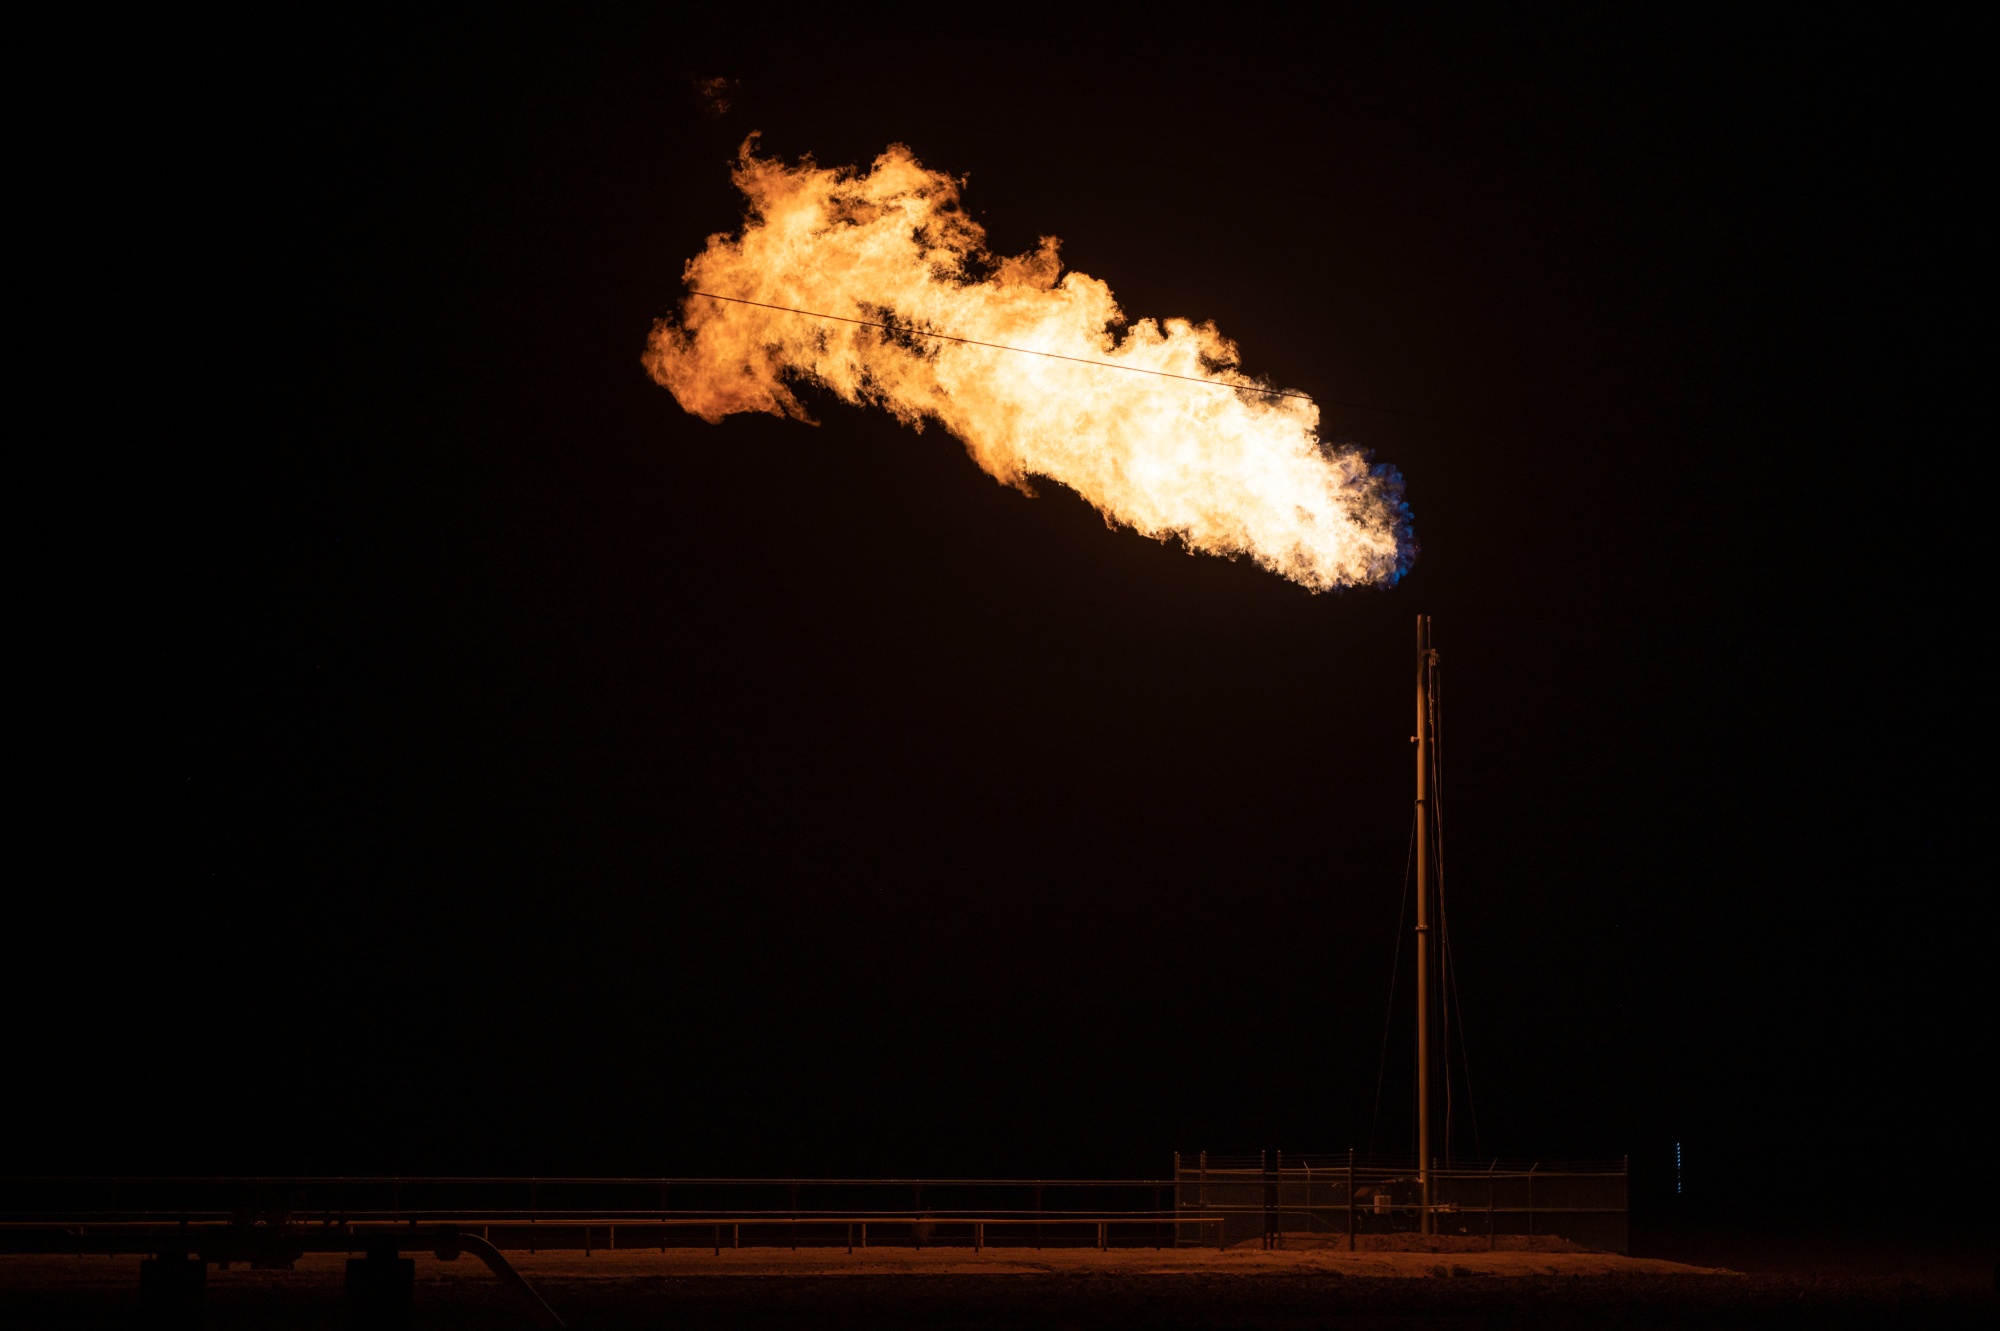 Gas flaring and venting wastes resources and heats the planet – it